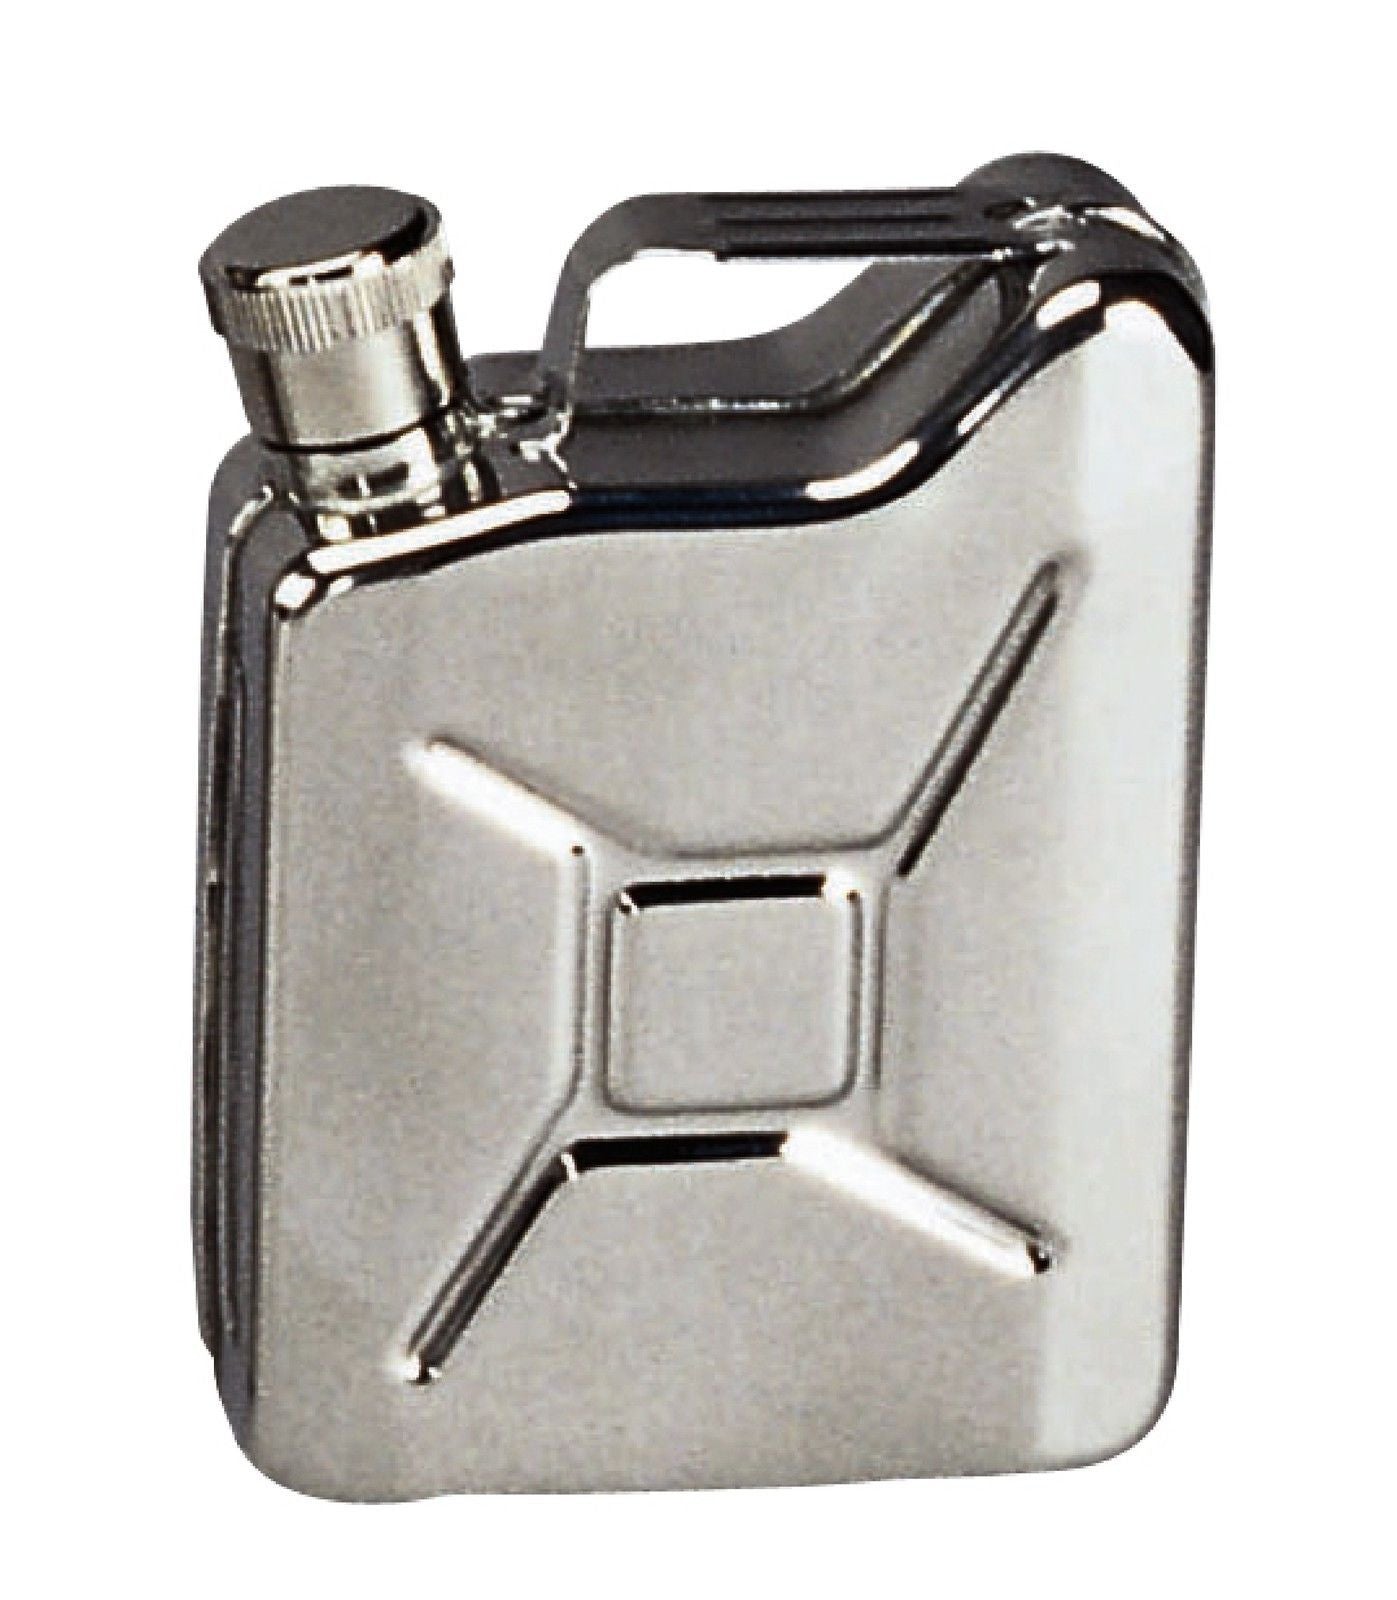 Stainless Steel Jerry Can Flask - 6oz Silver Metallic G.I. Gas Can Flasks